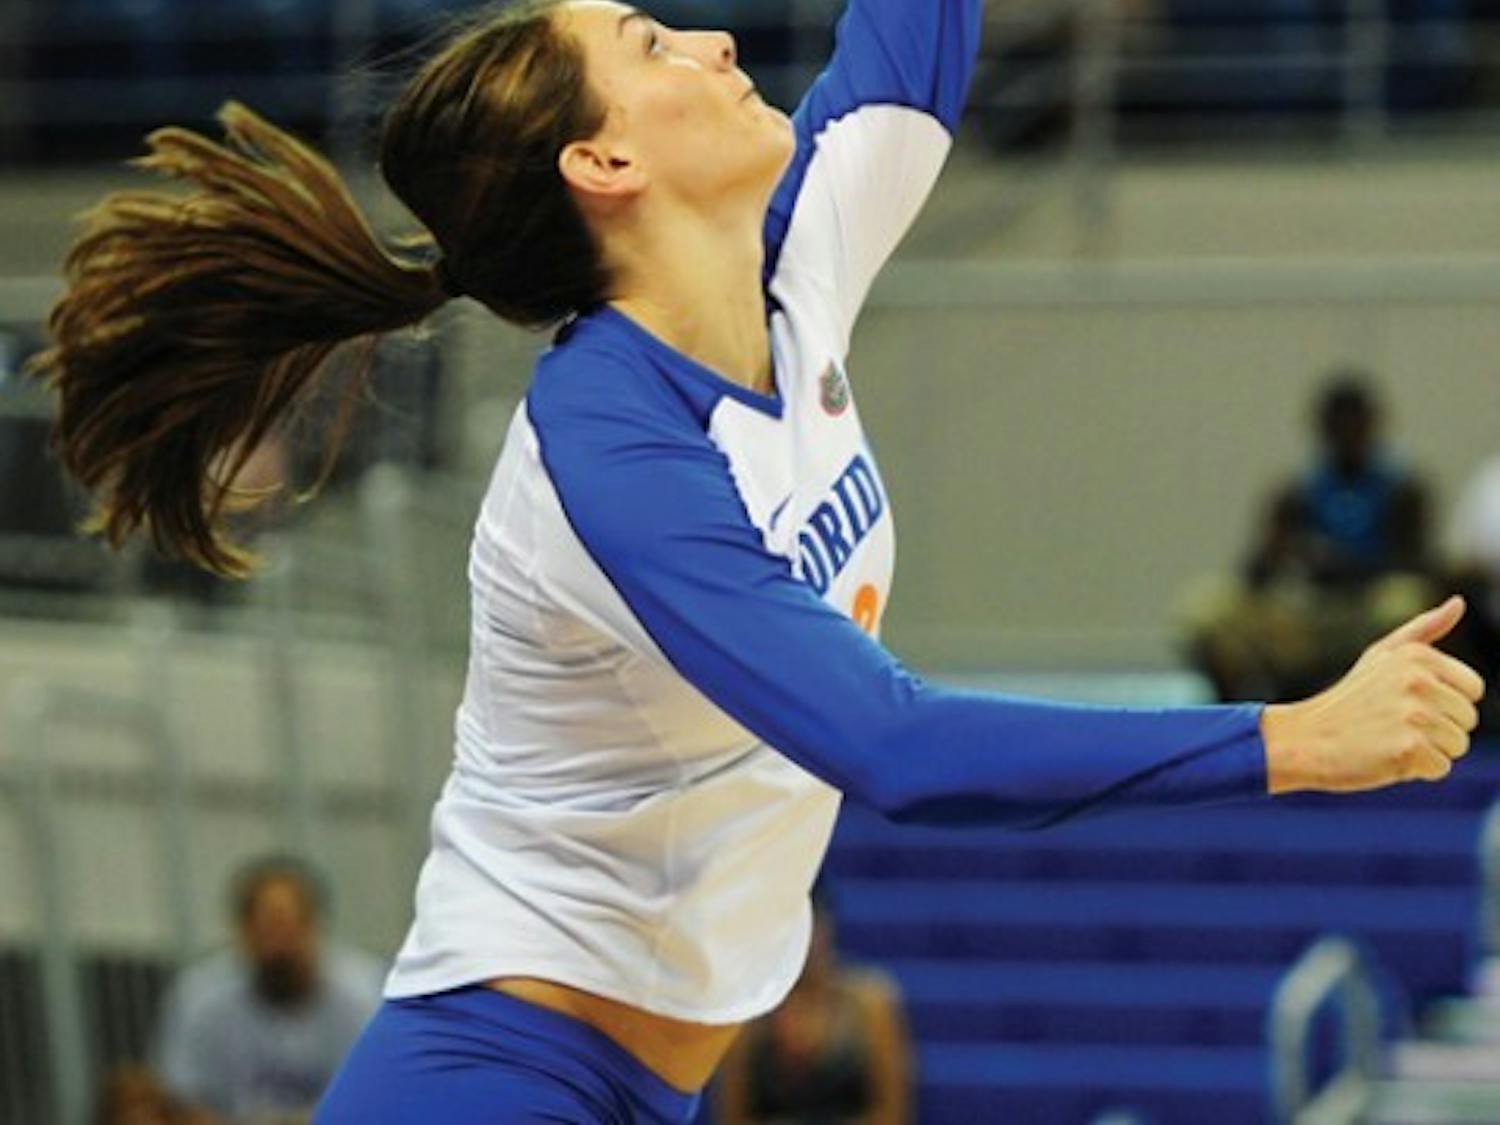 Senior setter Kelly Murphy hit a season-low .171 in Sunday’s loss to Tennessee at home.